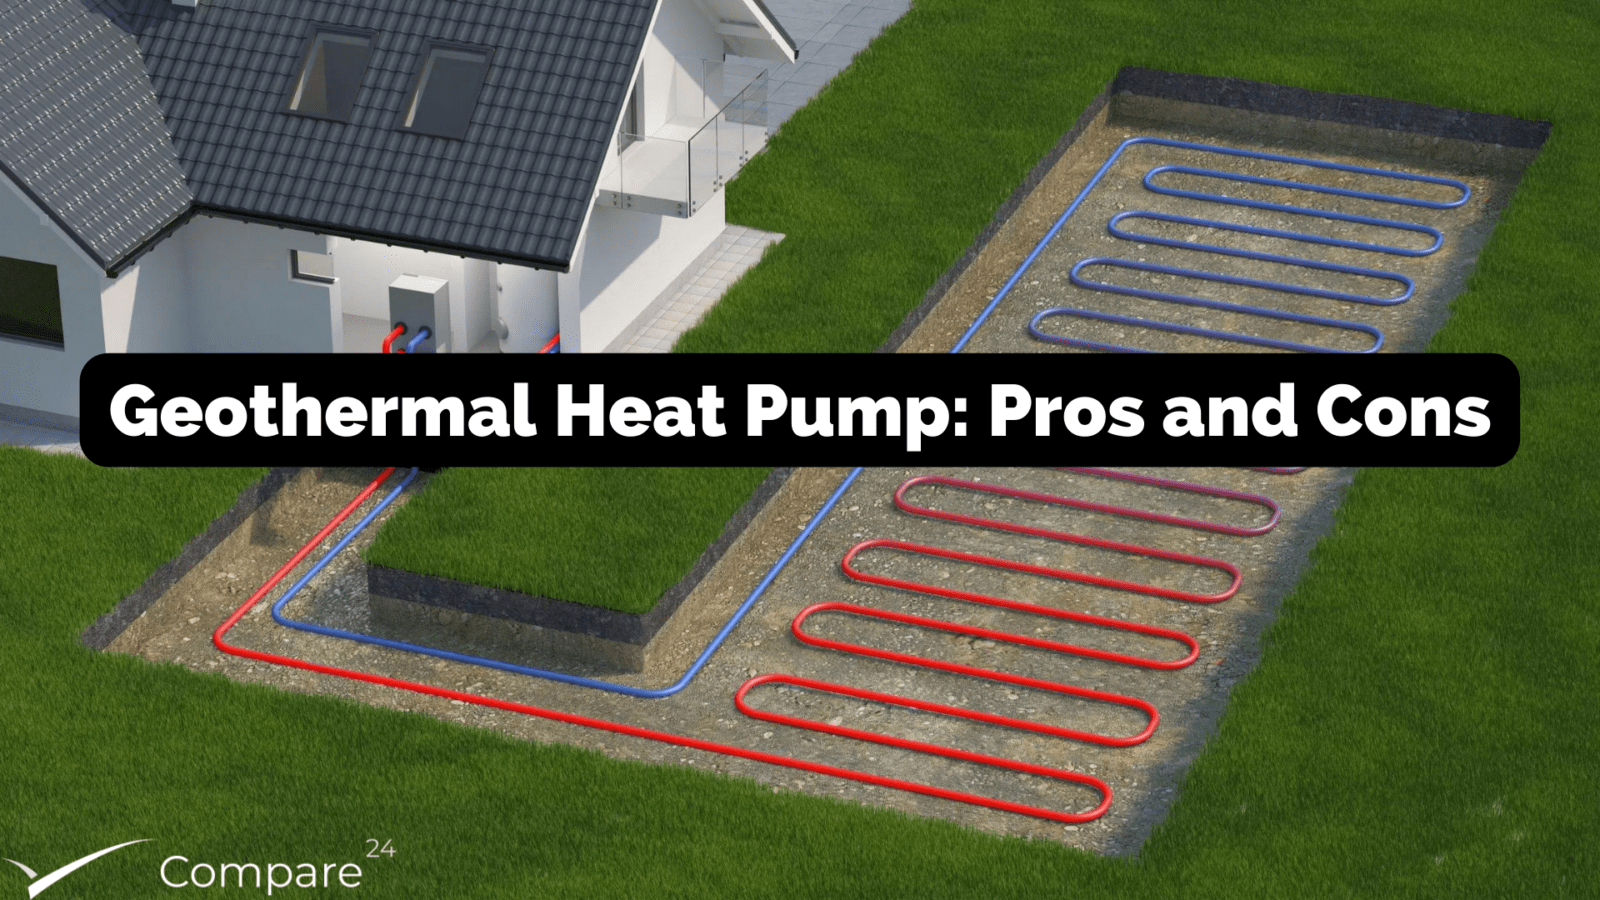 Geothermal Heat Pump Pros and Cons